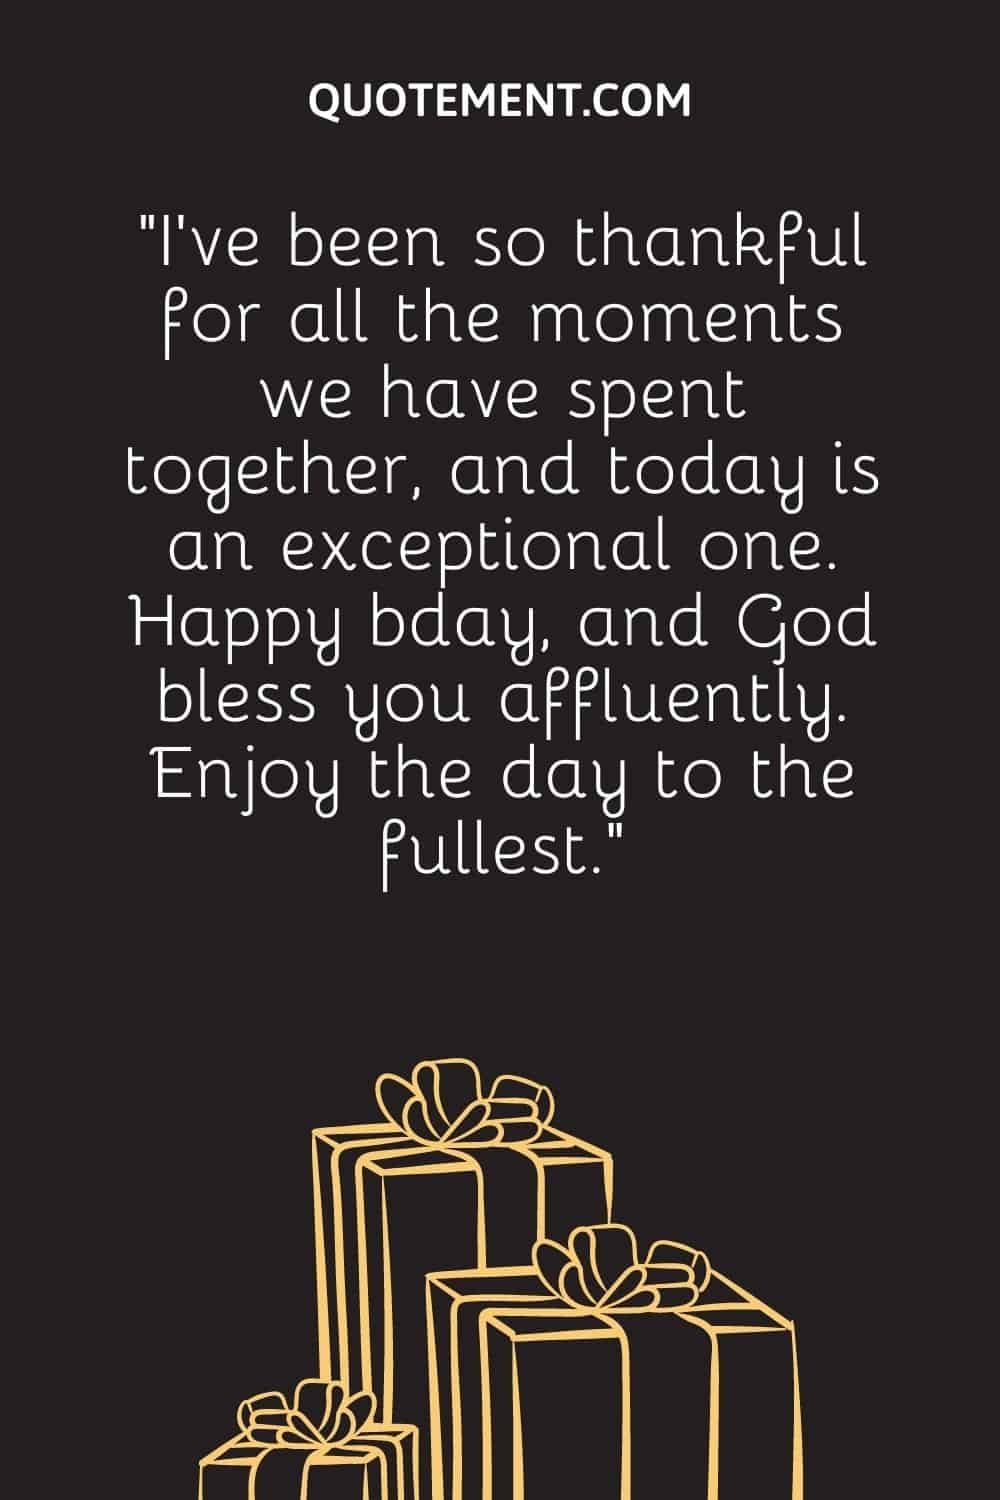 “I’ve been so thankful for all the moments we have spent together, and today is an exceptional one. Happy bday, and God bless you affluently. Enjoy the day to the fullest.”